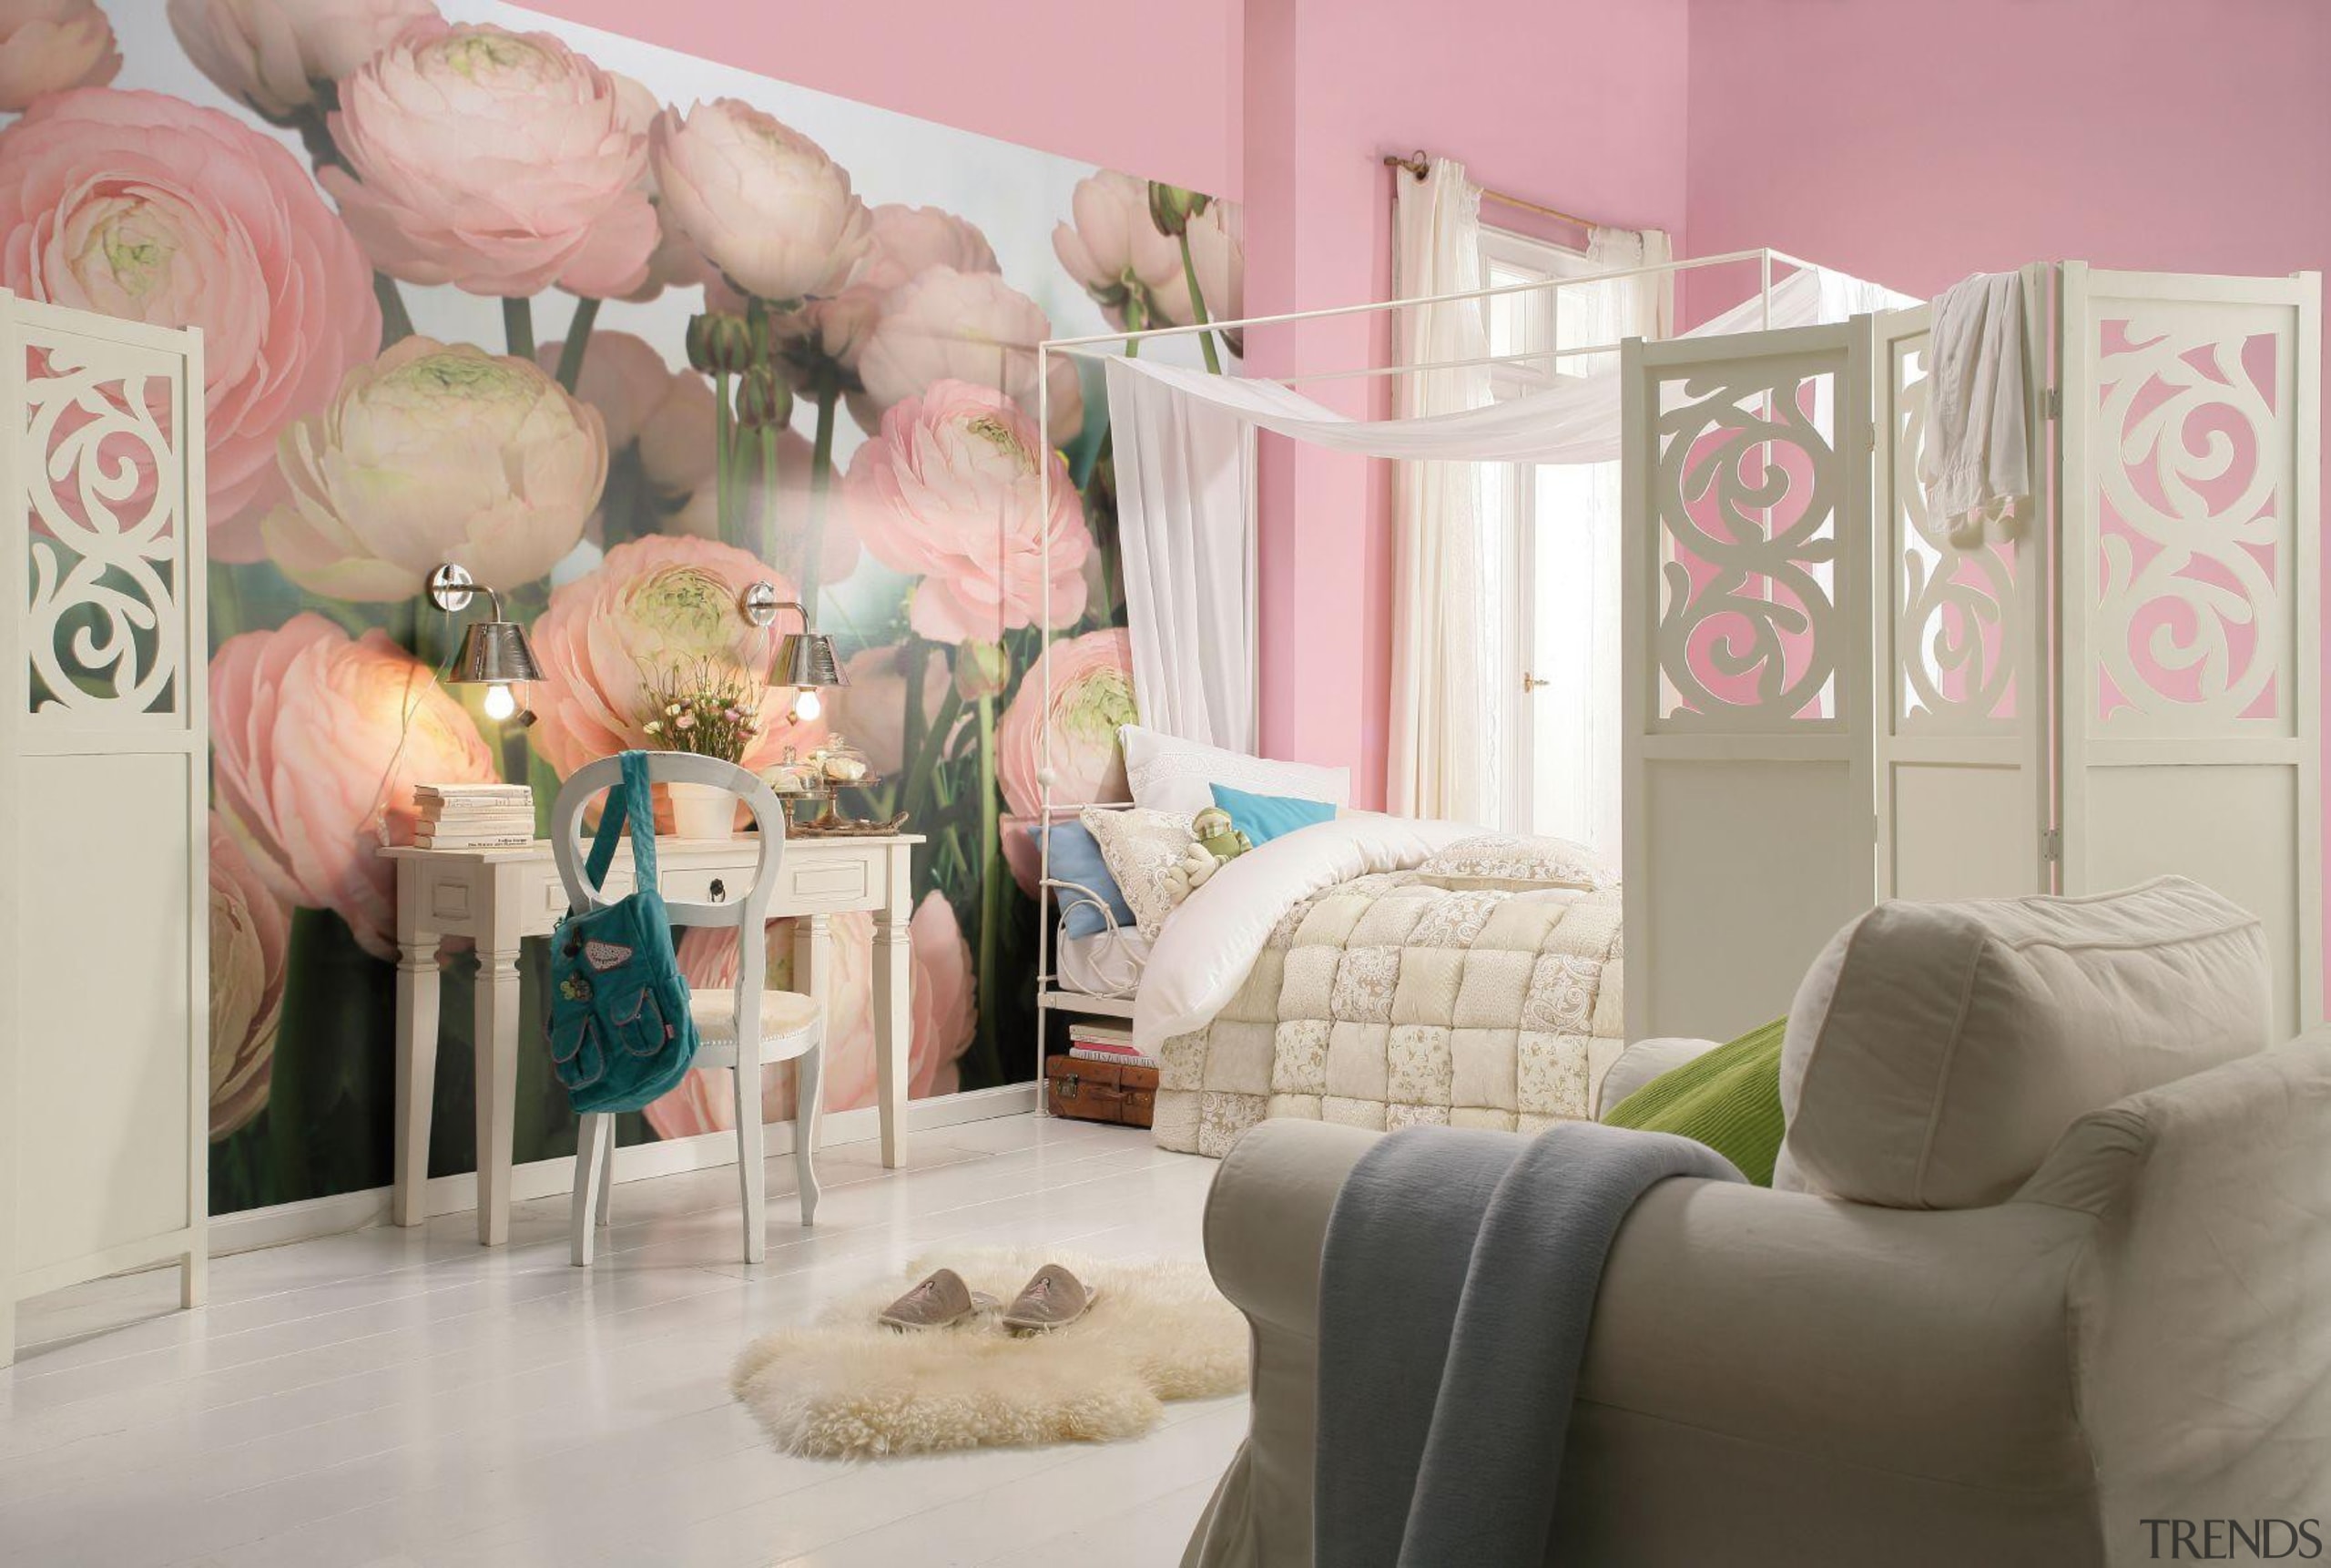 Gentle Rose Interieur - Italian Color Range - bed, bedroom, furniture, home, interior design, nursery, pink, product, room, textile, wall, gray